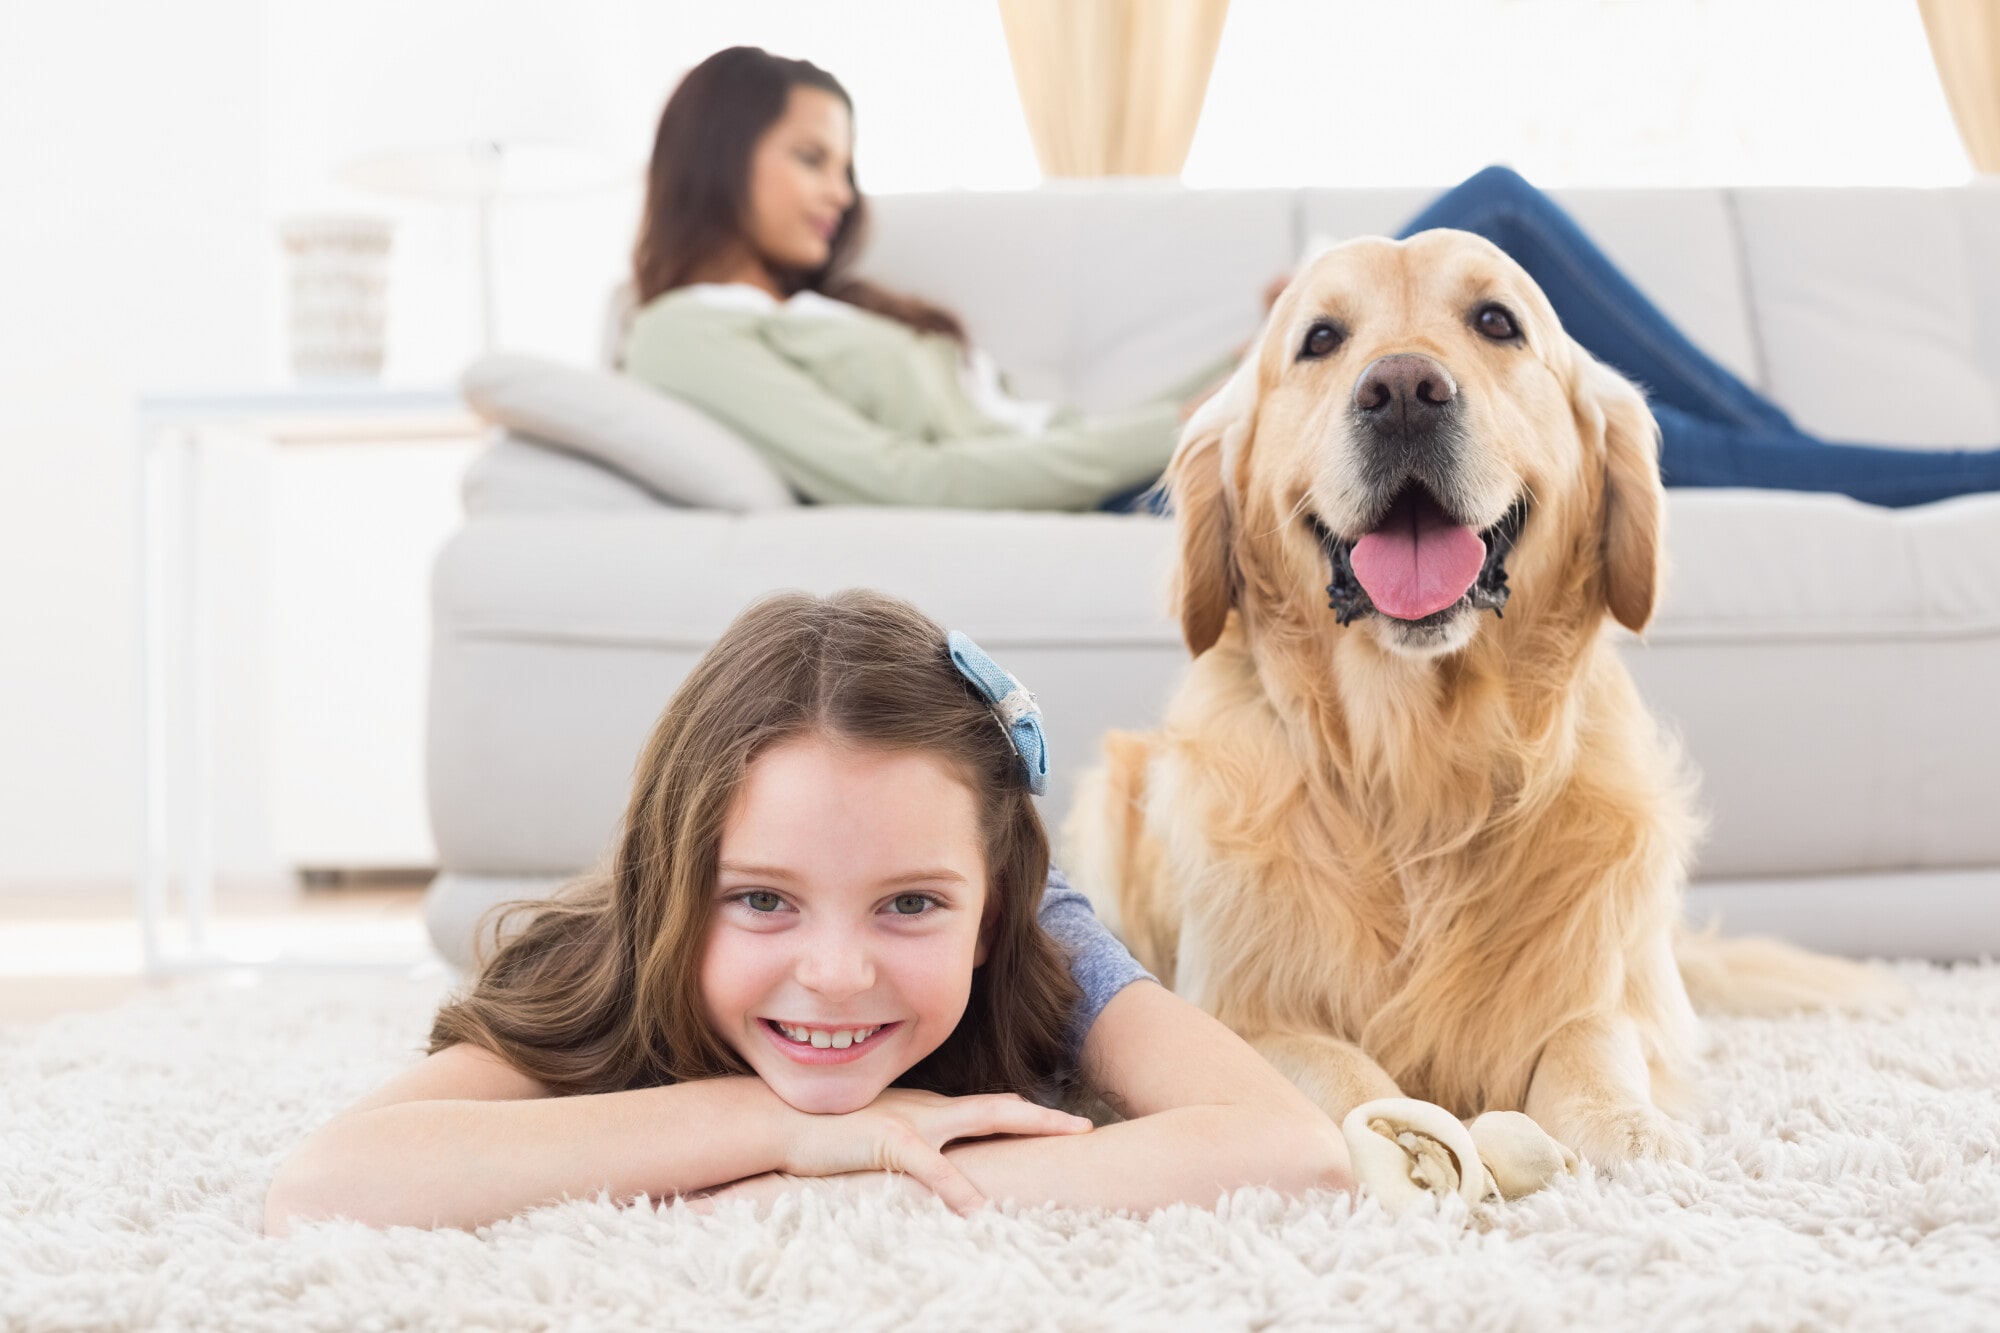 San Francisco Bay Property Management: Should You Allow Pets in a Rental Property?